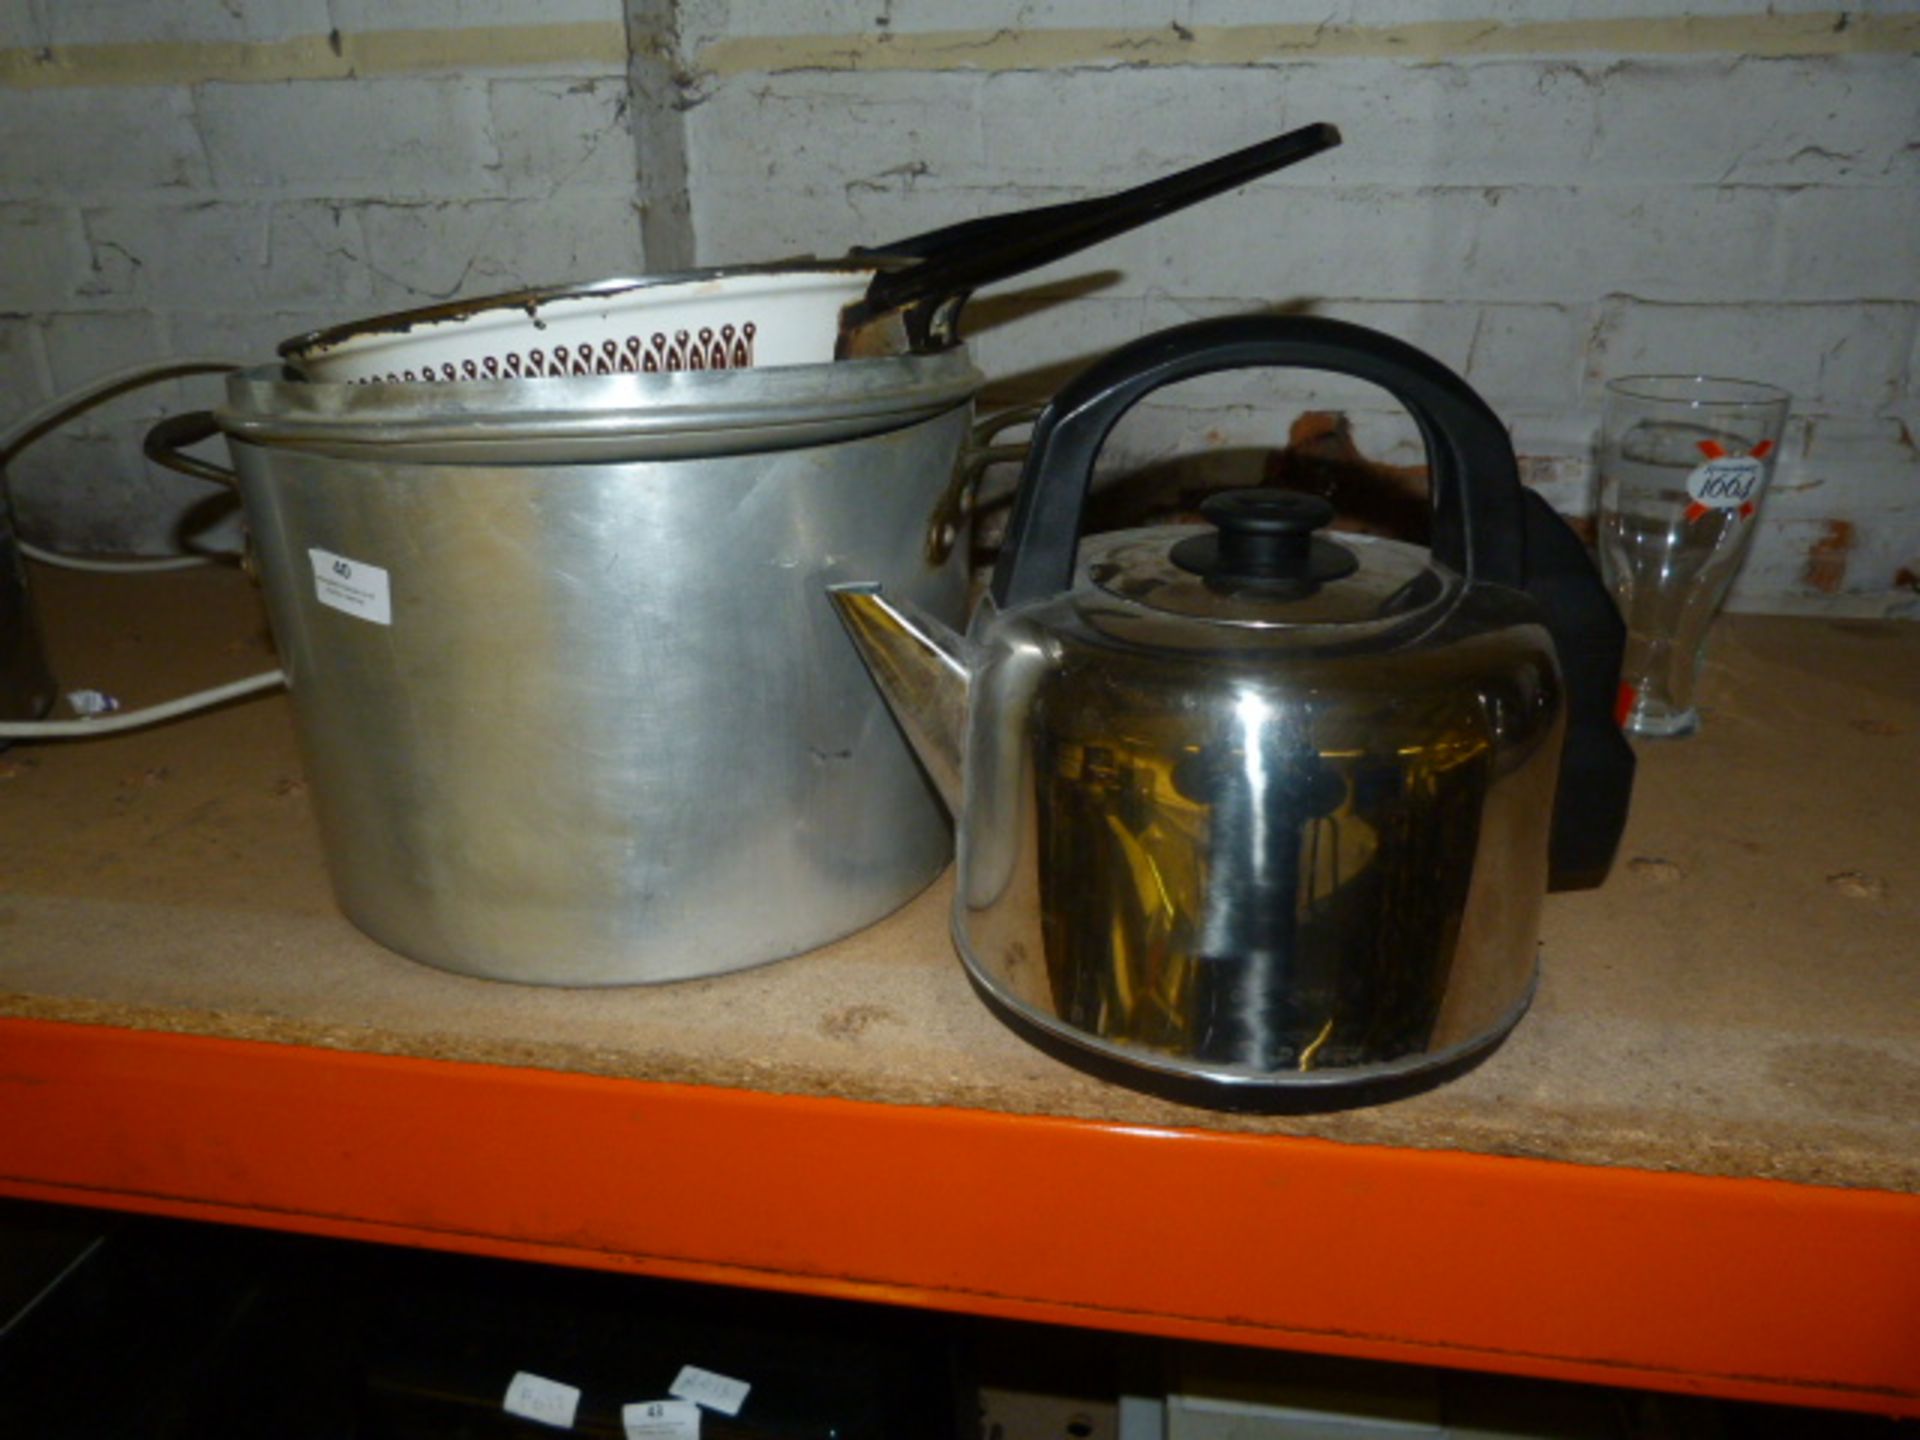 Large Aluminium Pan, Two Fry Pans and a Commercial